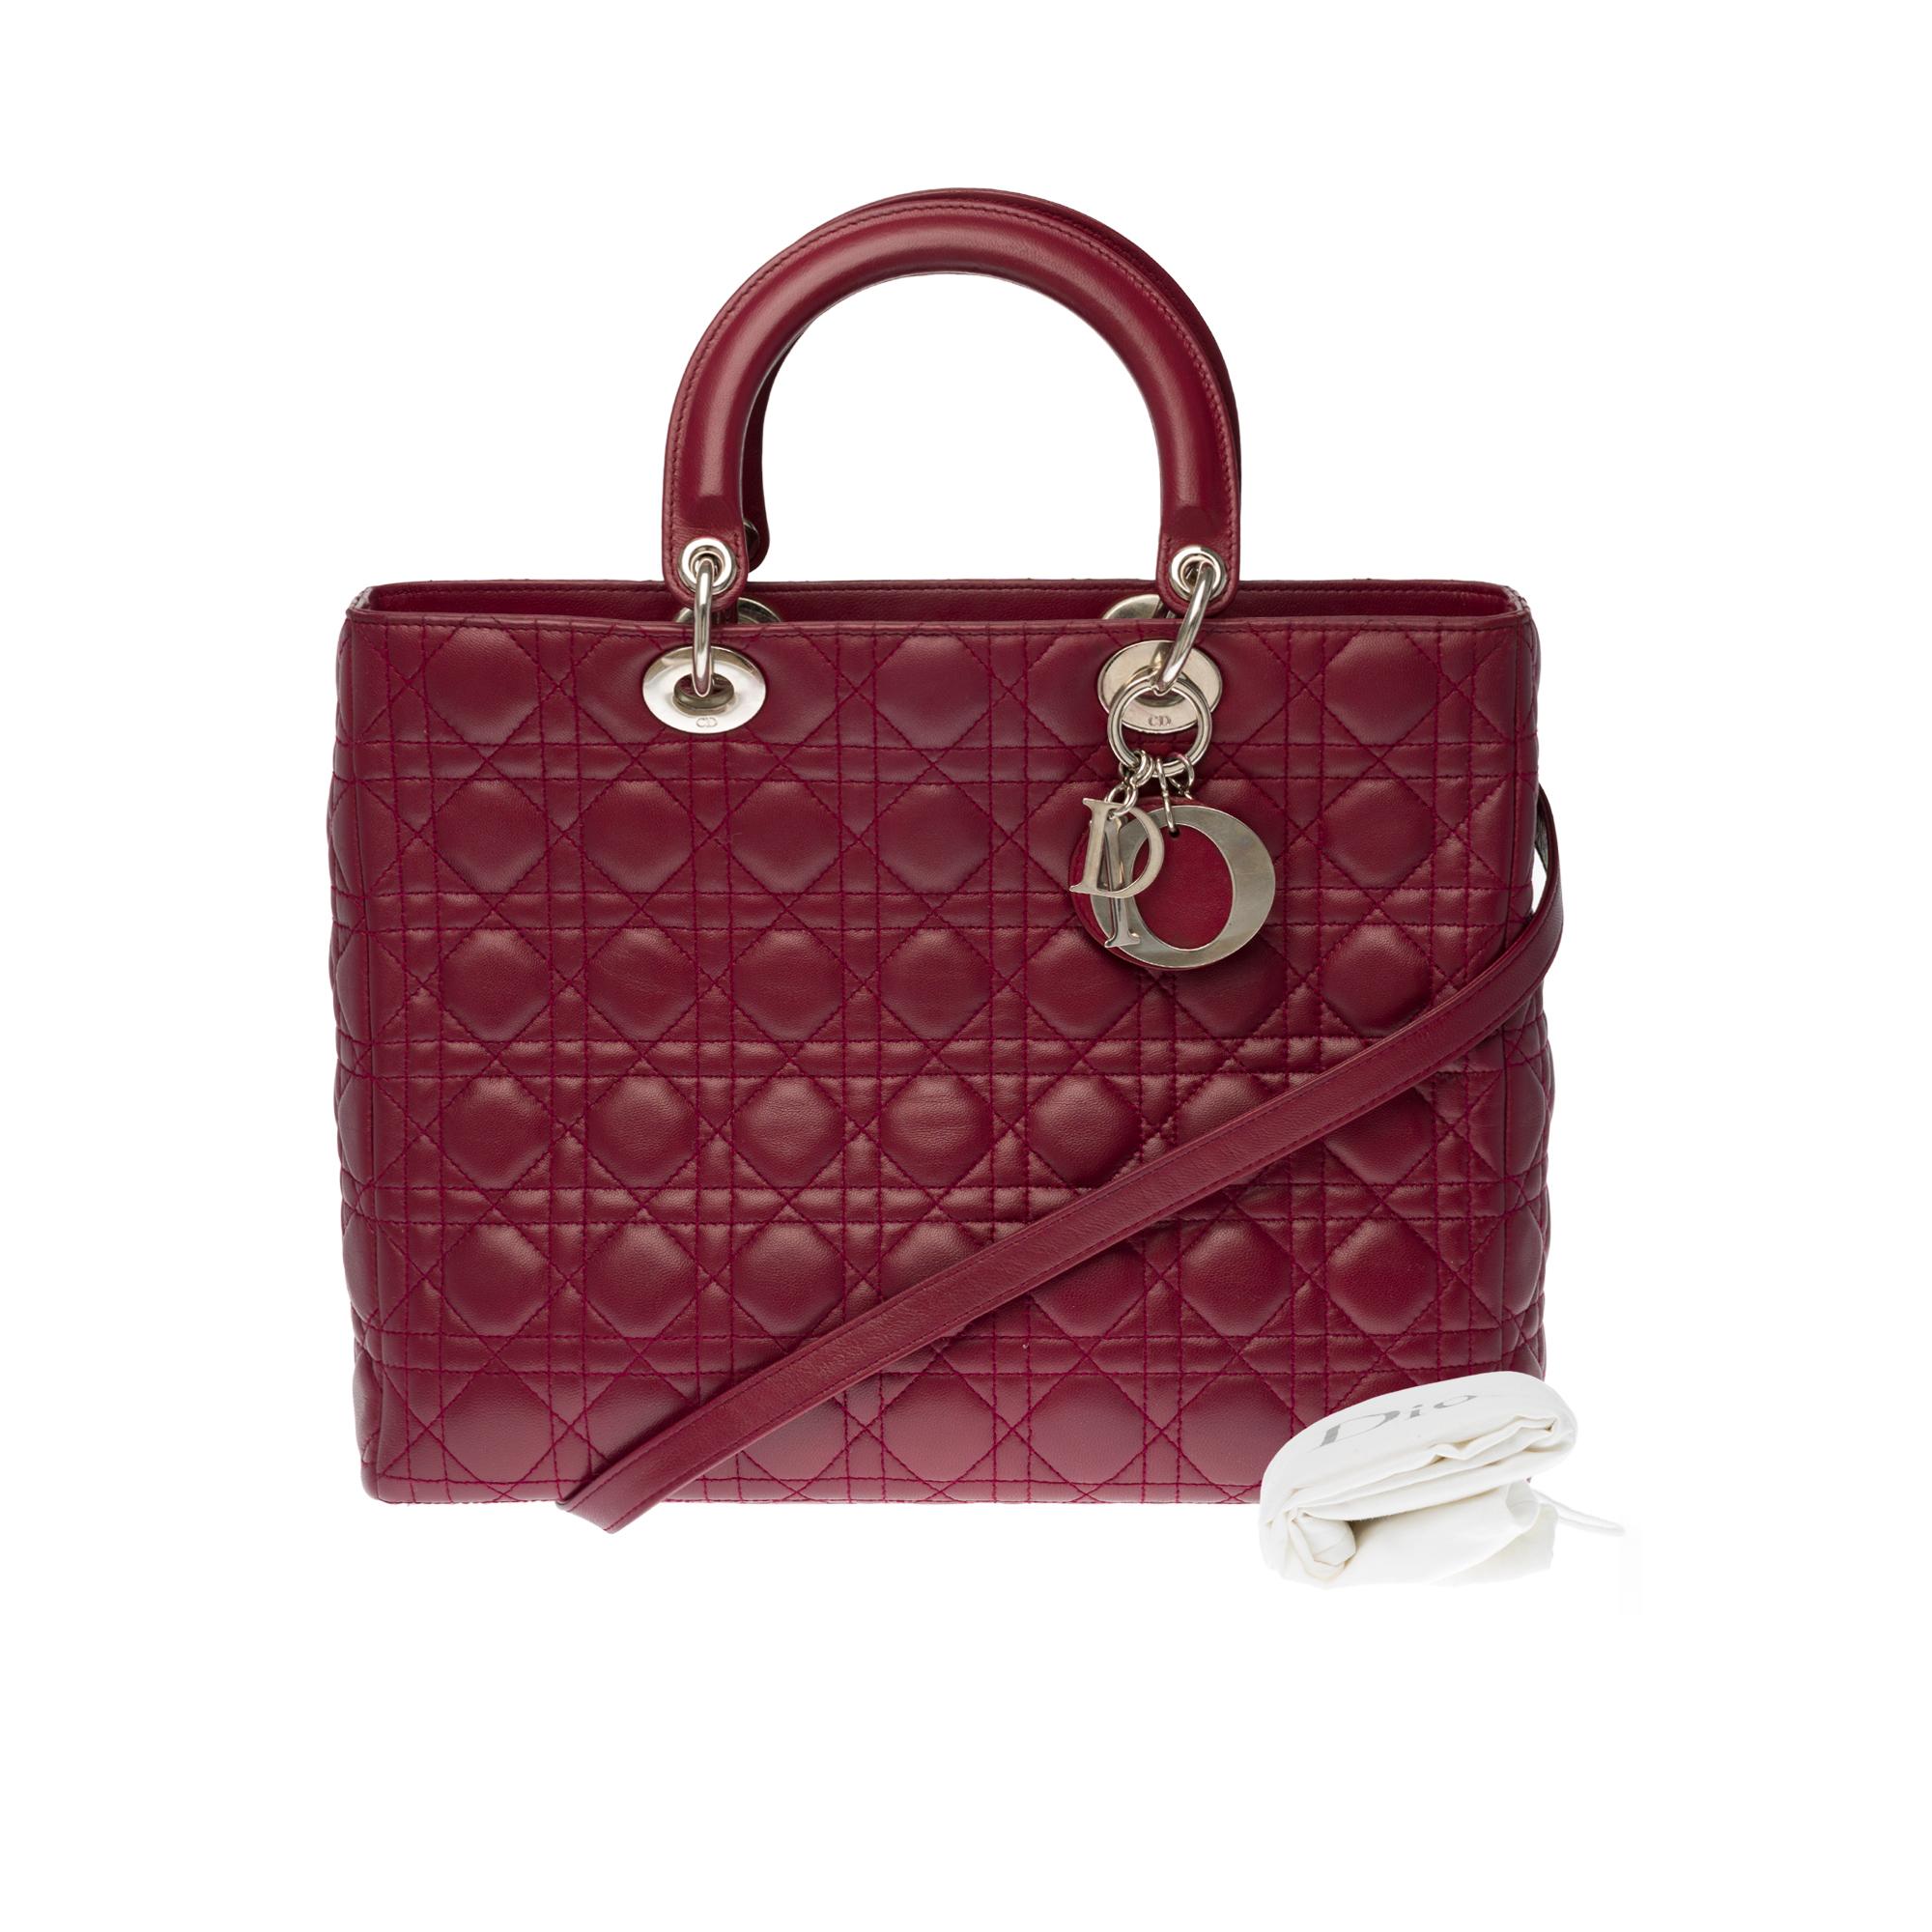 Lady Dior GM ( large size) shoulder bag with strap in plum cannage leather, SHW 3